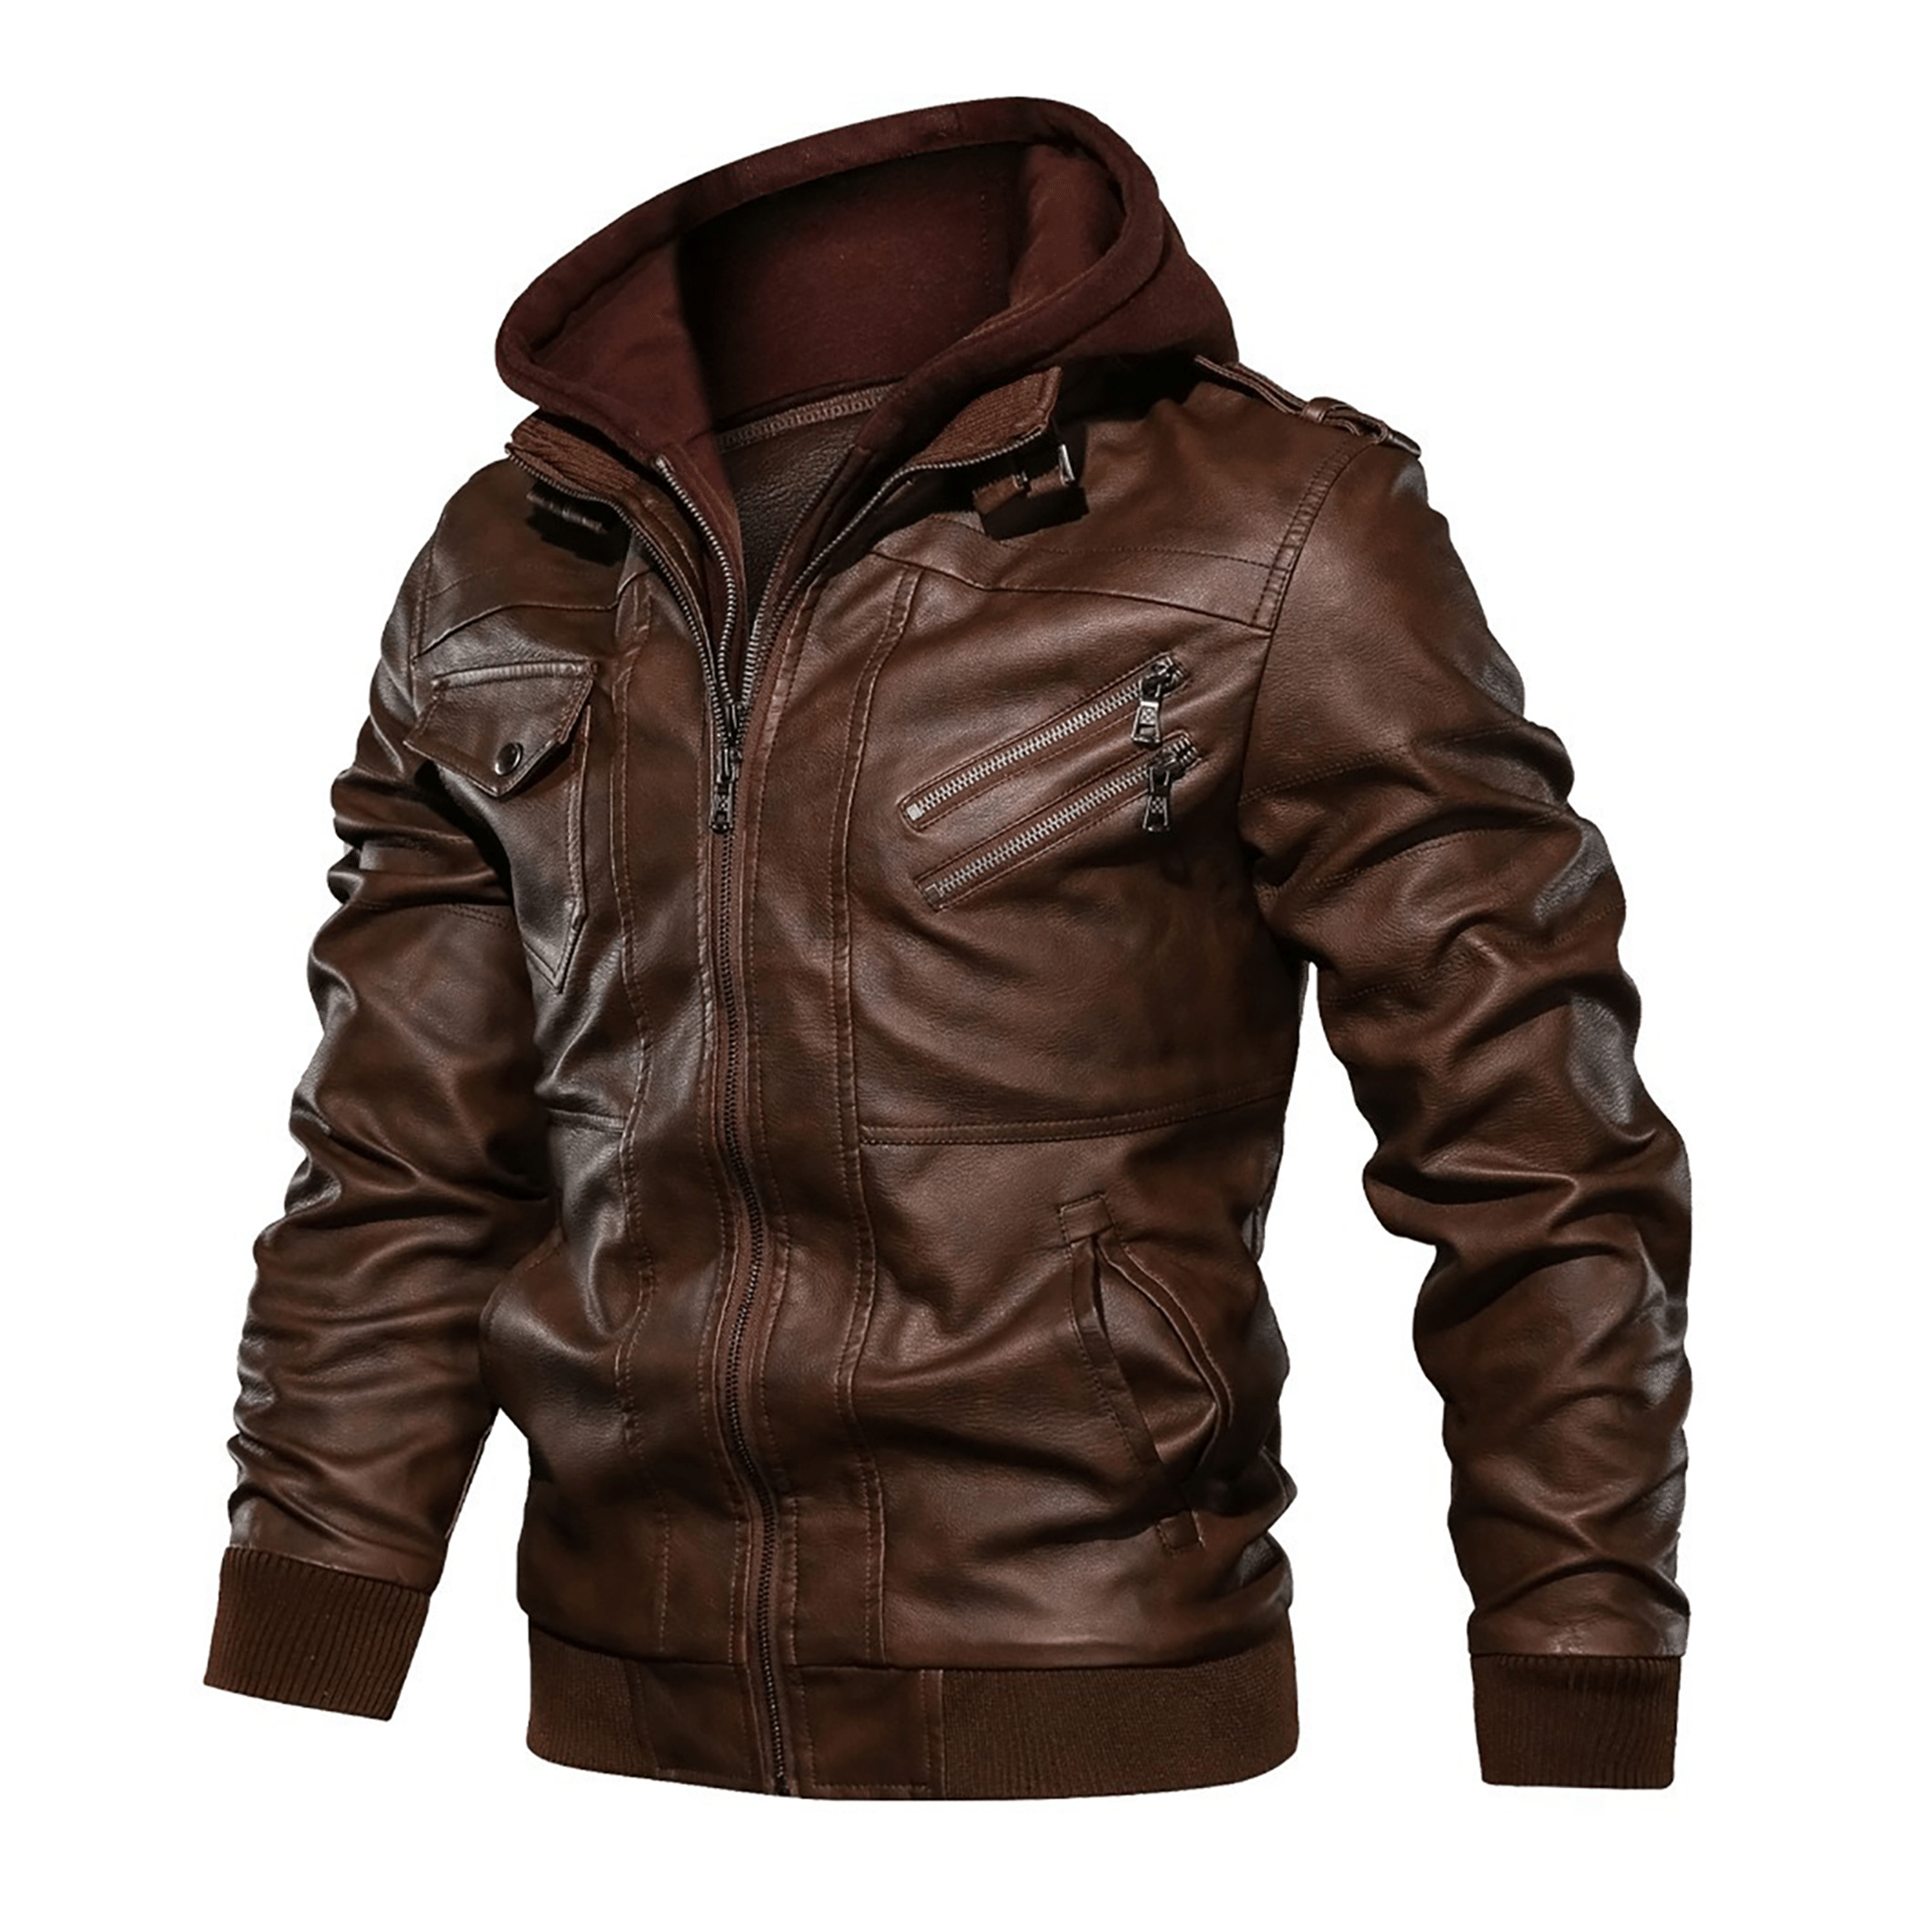 Top leather jackets and latest products 241